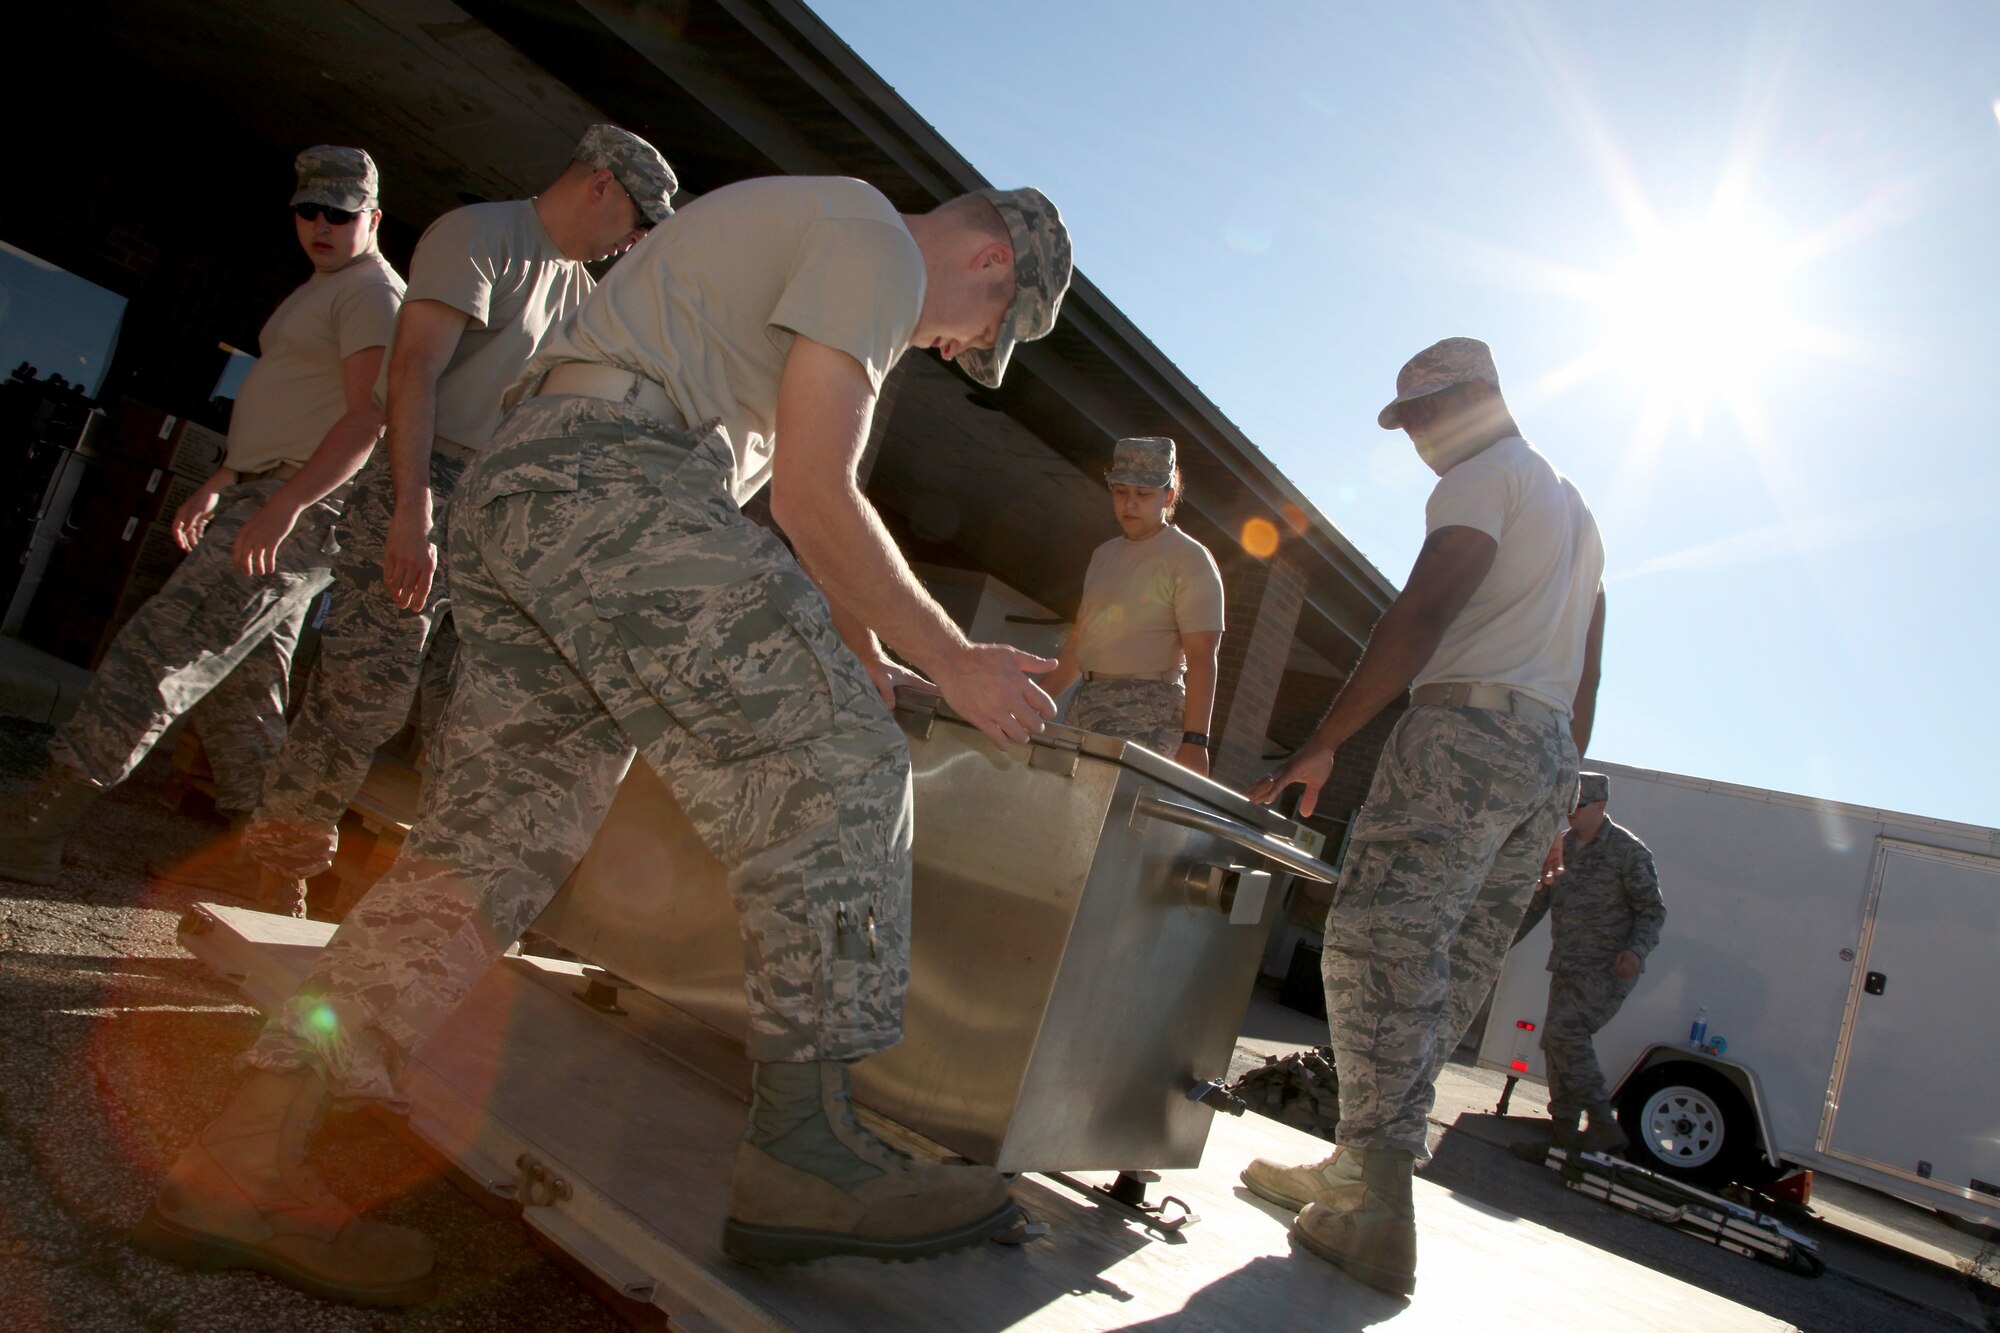 Members from the 179th Airlift Wing, Mansfield, Ohio and the 178th Wing, Springfield, Ohio, respond to hurricane relief efforts for Puerto Rico October 4, 2017. 15 airmen pack supplies needed for the next 30 days to maintain the Disaster Relief Mobile Kitchen (DRMKT). Airmen from both units will use the DRMKT to quickly prepare boil-in-the-bag meals for 1,000 people in under 90 minutes. The Ohio Air National Guard is always ready to respond with a team of trusted Airmen for state and federal missions.